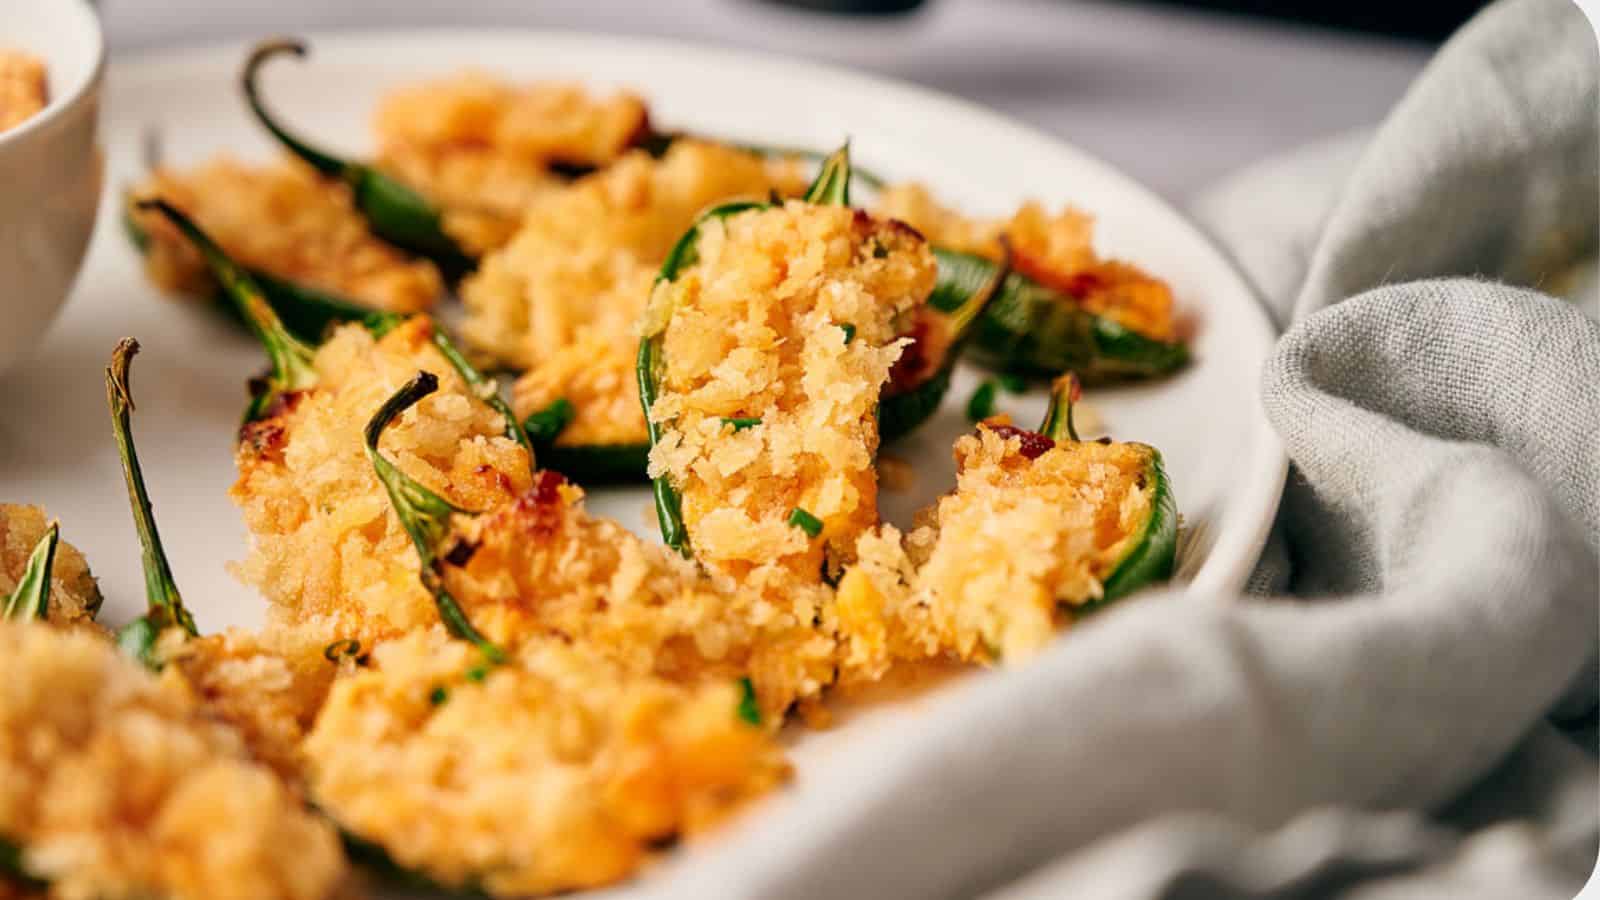 <p>Spice things up with our Air Fryer Jalapeño Poppers! These poppers, filled with heat and flavor, practically make themselves in the air fryer. Say goodbye to complicated appetizers and hello to an easy and pleasing spicy treat.<br><strong>Get the Recipe: </strong><a href="https://www.splashoftaste.com/jalapeno-poppers-2/?utm_source=msn&utm_medium=page&utm_campaign=msn">Air Fryer Jalapeño Poppers</a></p>